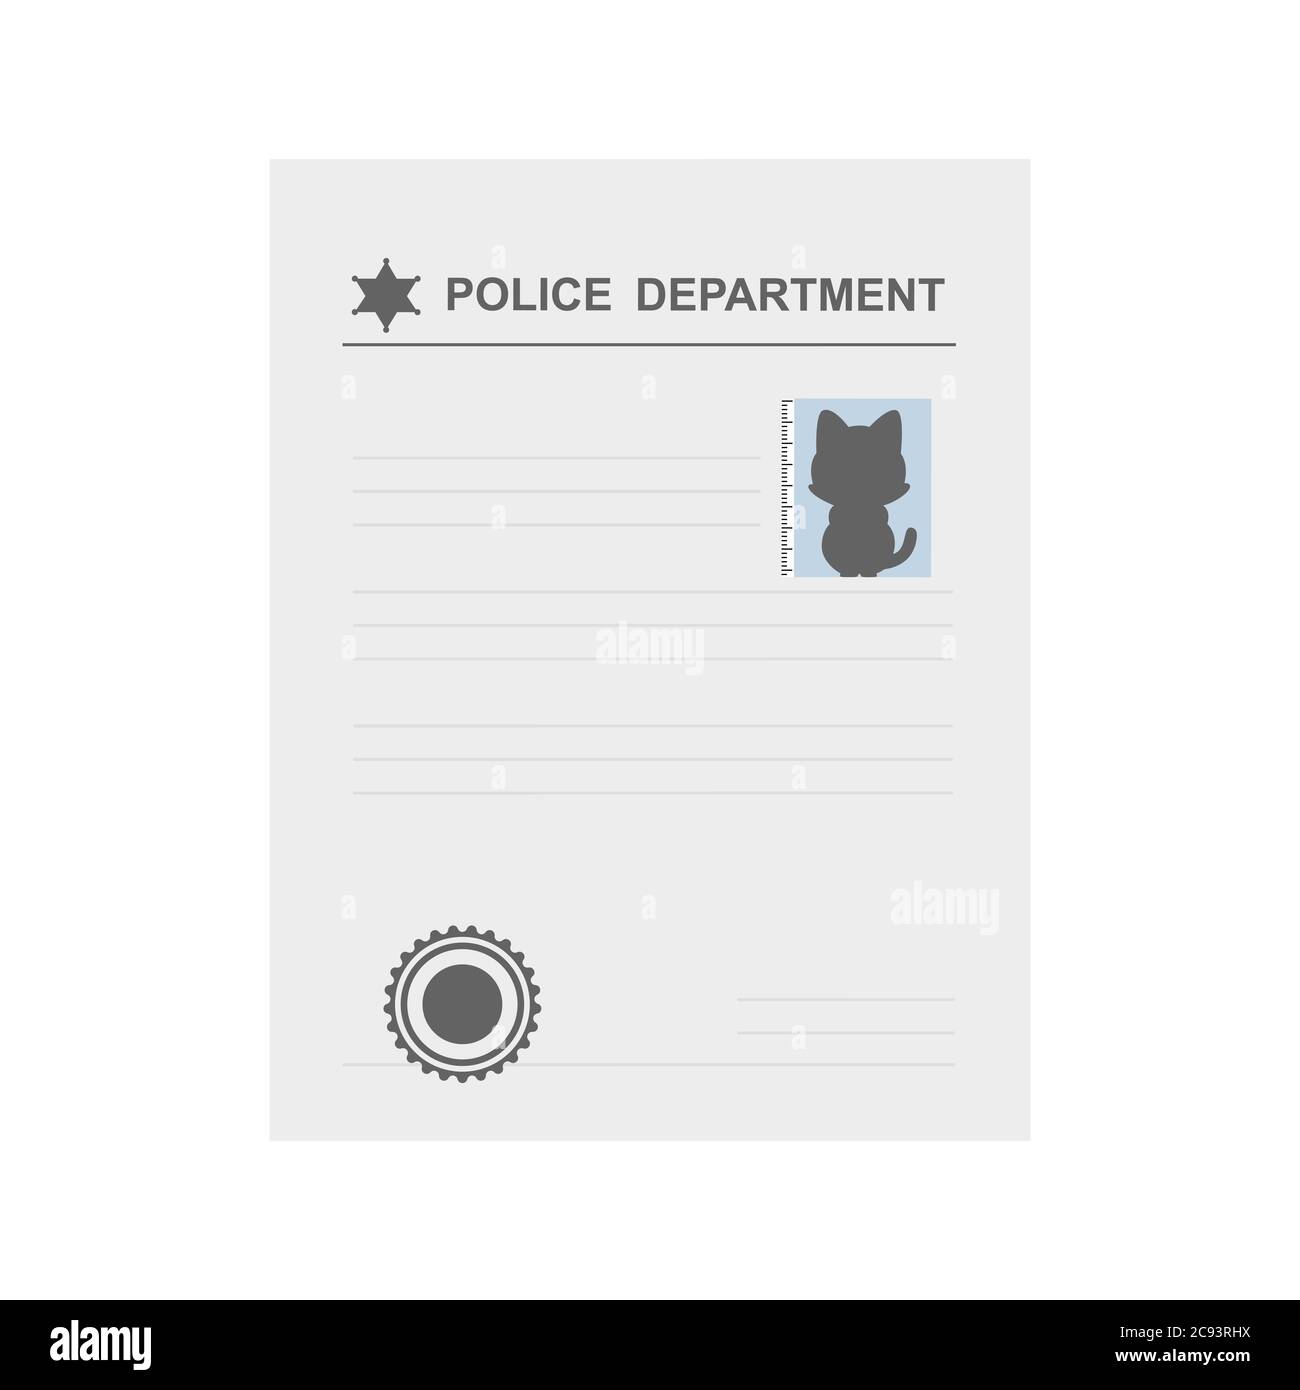 Cartoon icon of the police department case file documentation with cat suspect, vector illustration Stock Vector